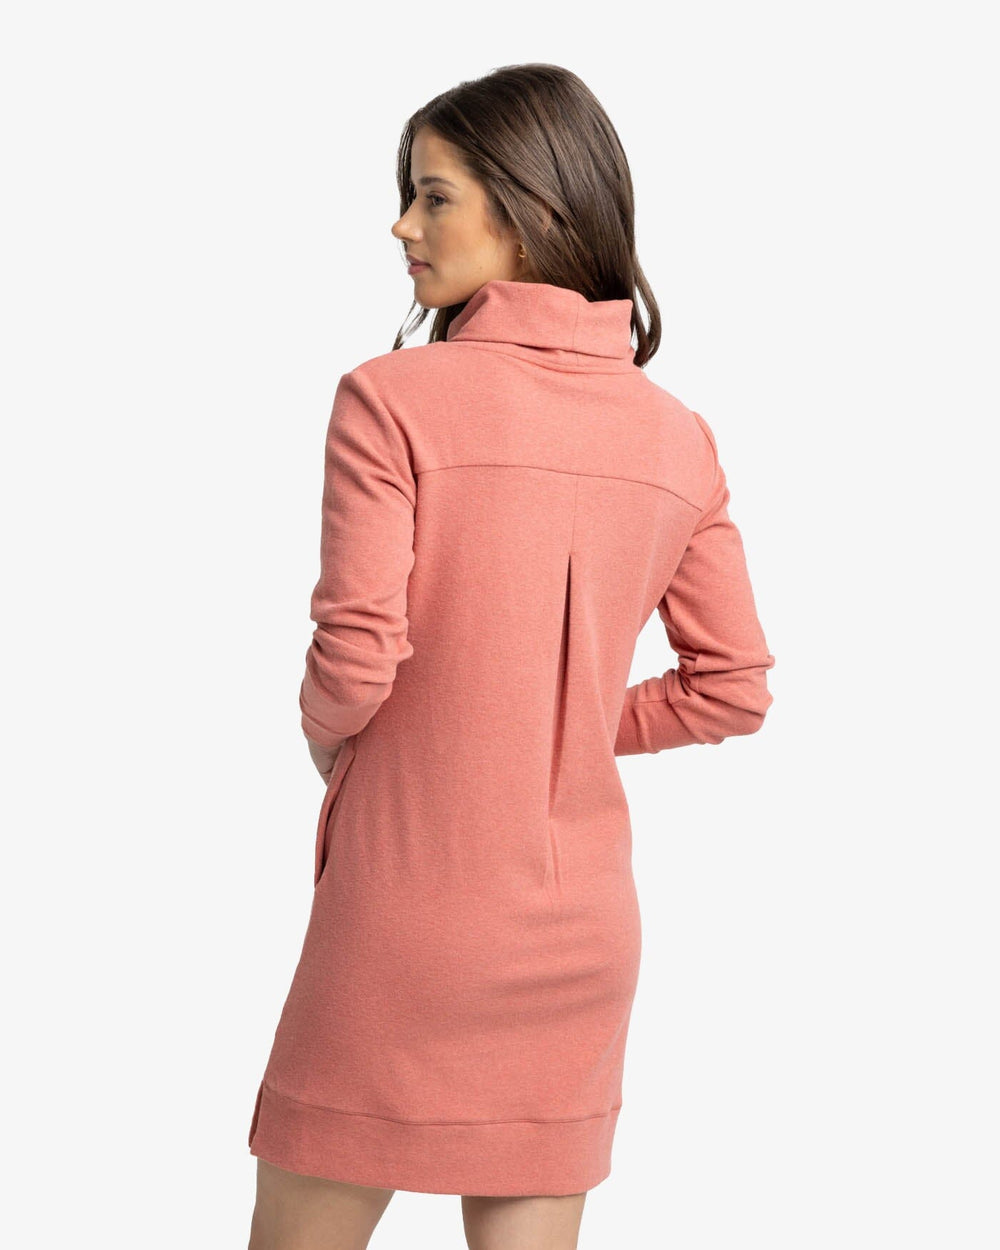 The back view of the Southern Tide Lynn Dress by Southern Tide - Heather Dusty Coral